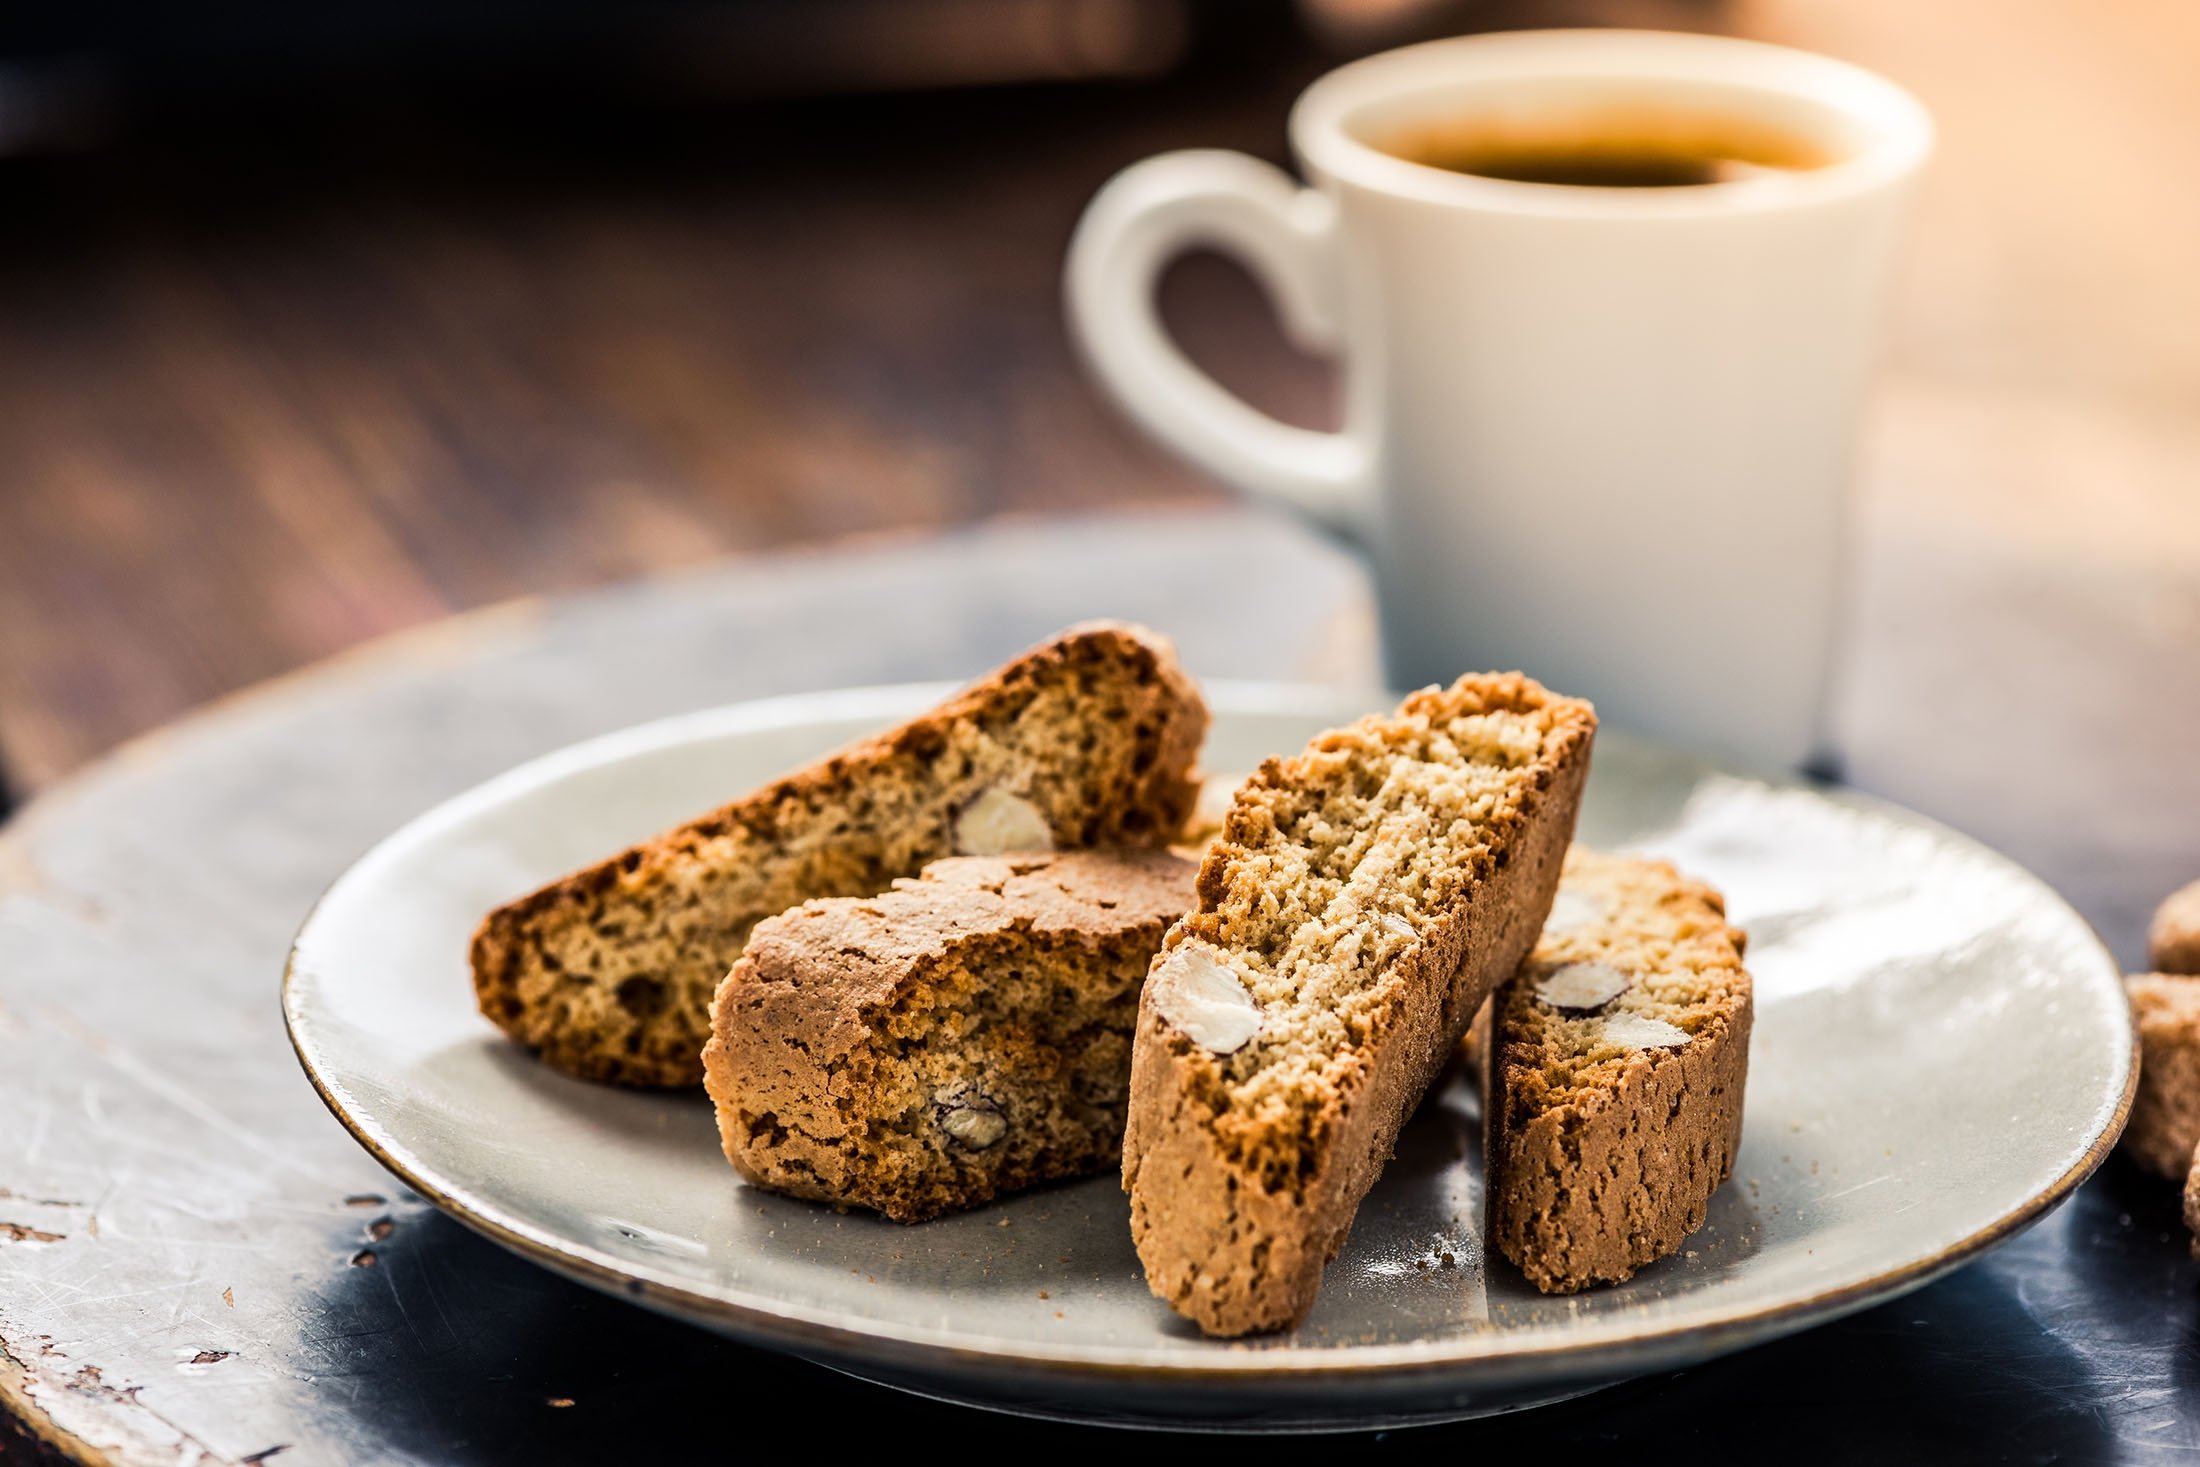 Biscotti is a long-lasting cookie because it is baked twice.  (Shutterstock photo)